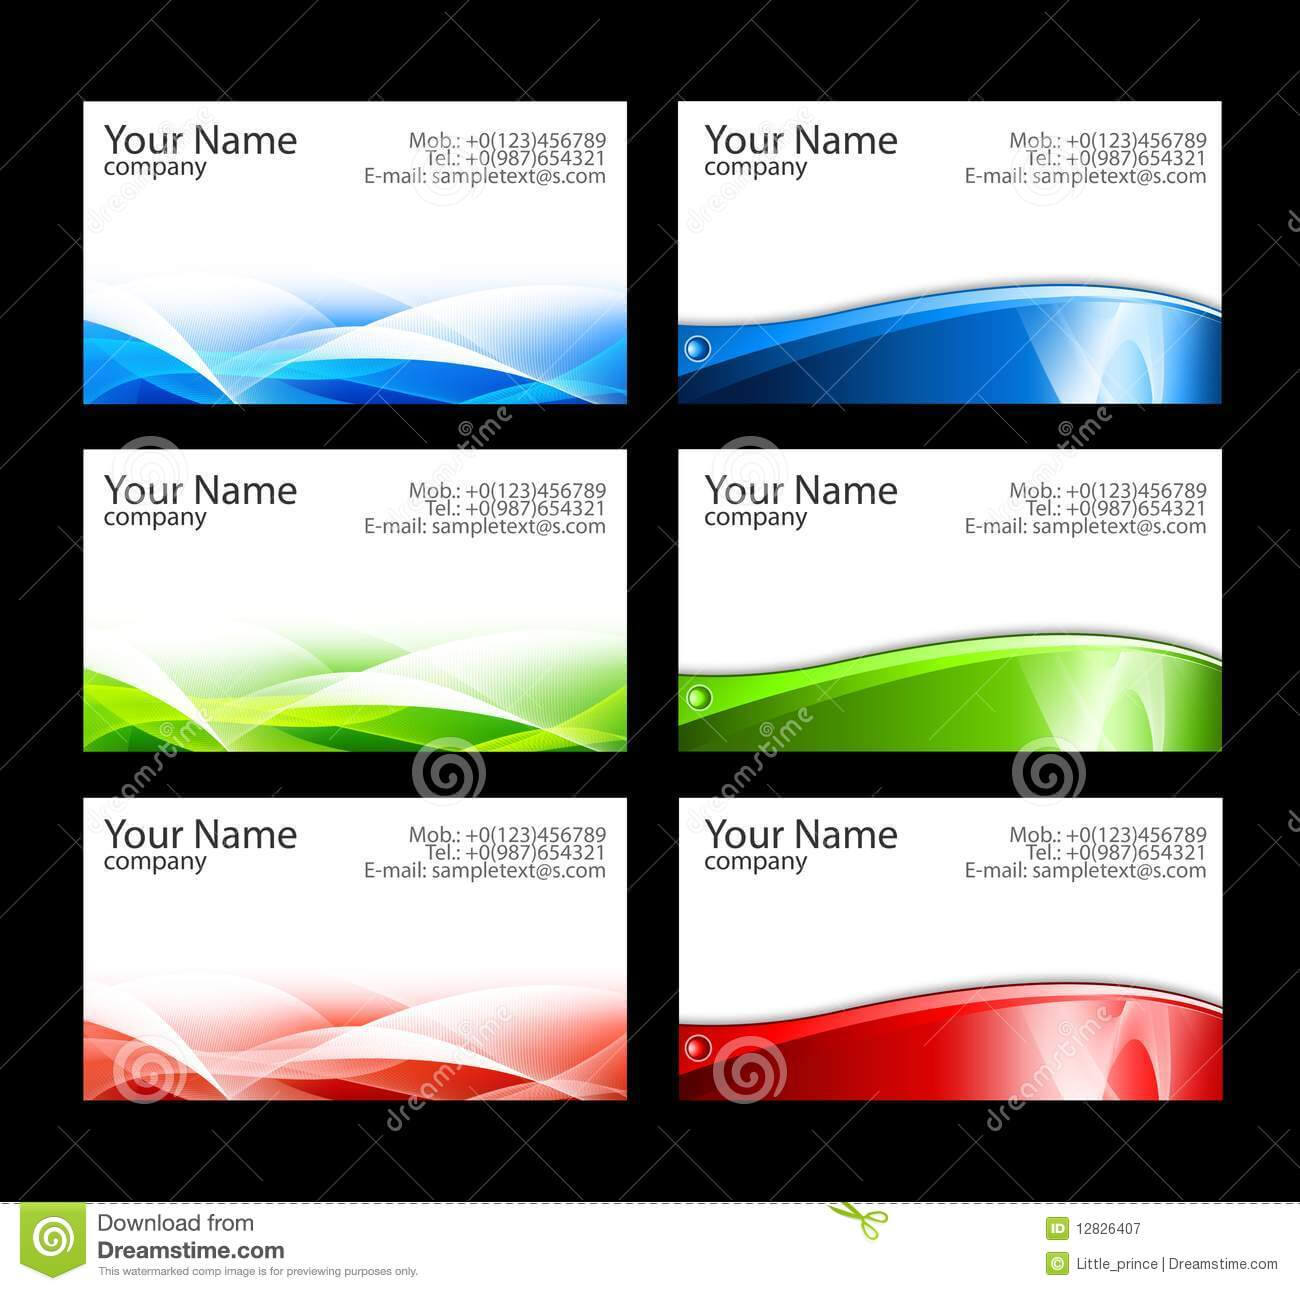 Free Calling Card Template Download – Tunu.redmini.co Intended For Call Card Templates